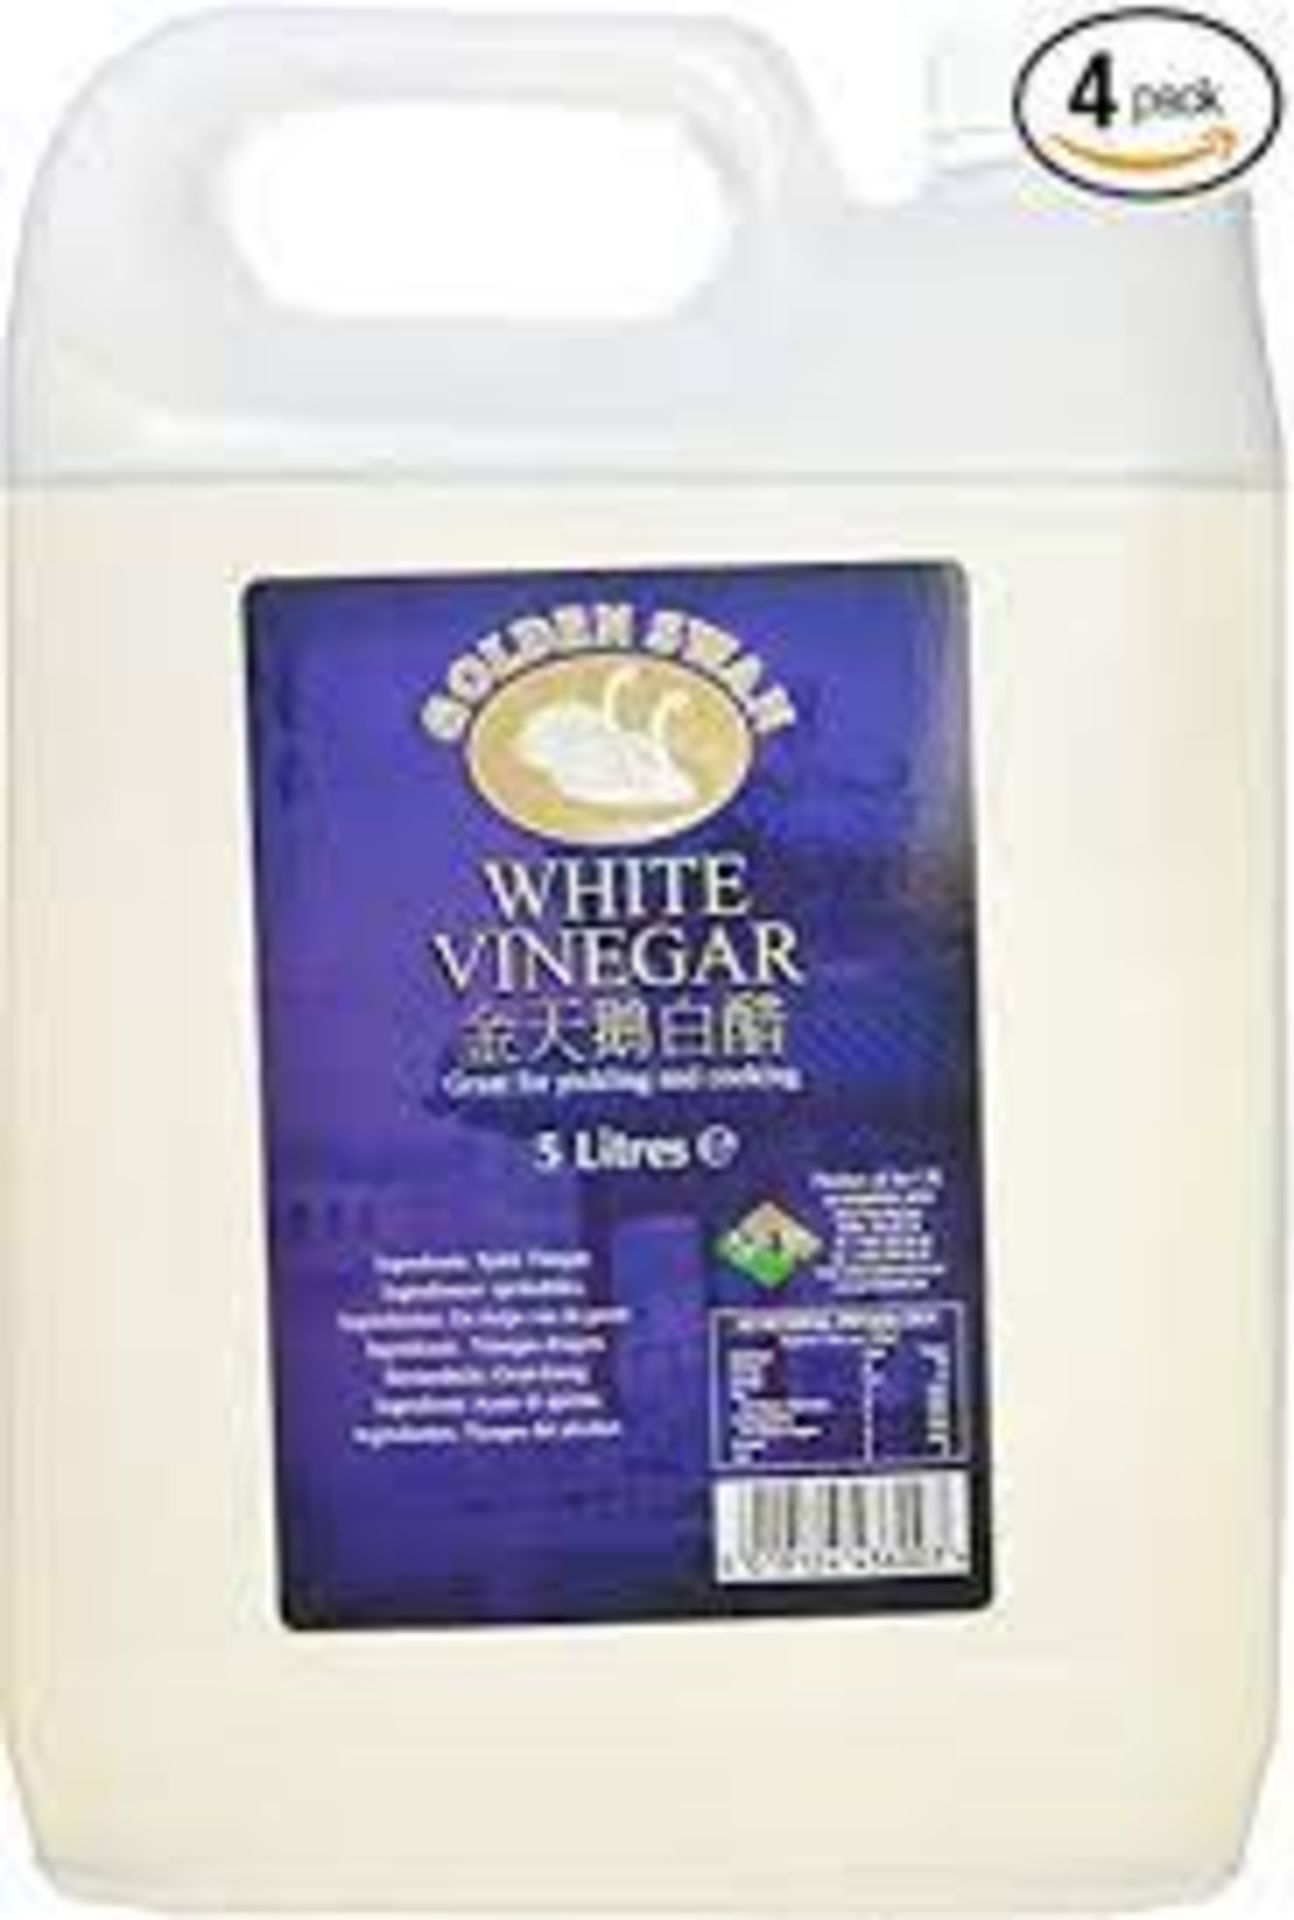 RRP £505 (Count 23) Spsnj21Rkmc Golden Swan White Vinegar, 5 L (Pack Of 4) (Condition Reports